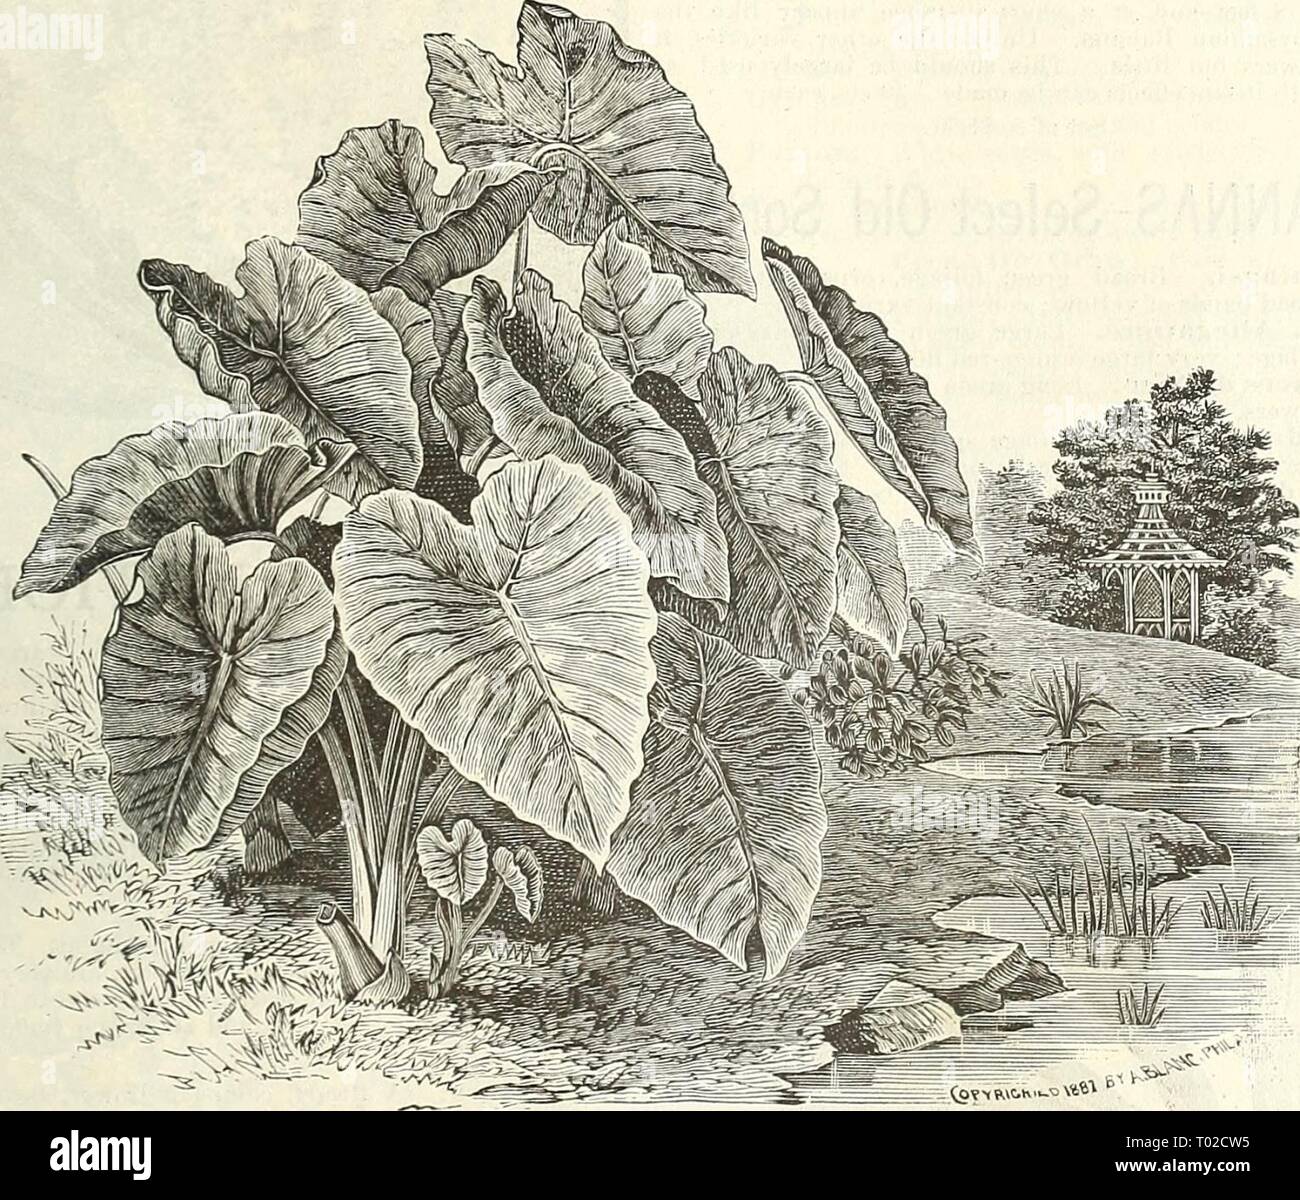 Dreer's garden calendar : 1889 . dreersgardencale1889henr Year: 1889  Bouvardia Sang Lobkaine.    ^?'«WC»h»-^**'^ Caladium Esculentum. CALADIUM. (Elephant's Ear. One of the most eifective ]ilants in cultivation for the flower border or for plantijig out upon the lawn; it will grow in any good garden soil, and is of the easiest culture. To obtain the best results it .should be planted where iv will obtain plenty of water, and an abundauce of rich compost. E&lt;iculentuni. 'The best .sort for garden decoration ; foliage light greeu. When full size it stands tJ feet high, and bears immense leave Stock Photo